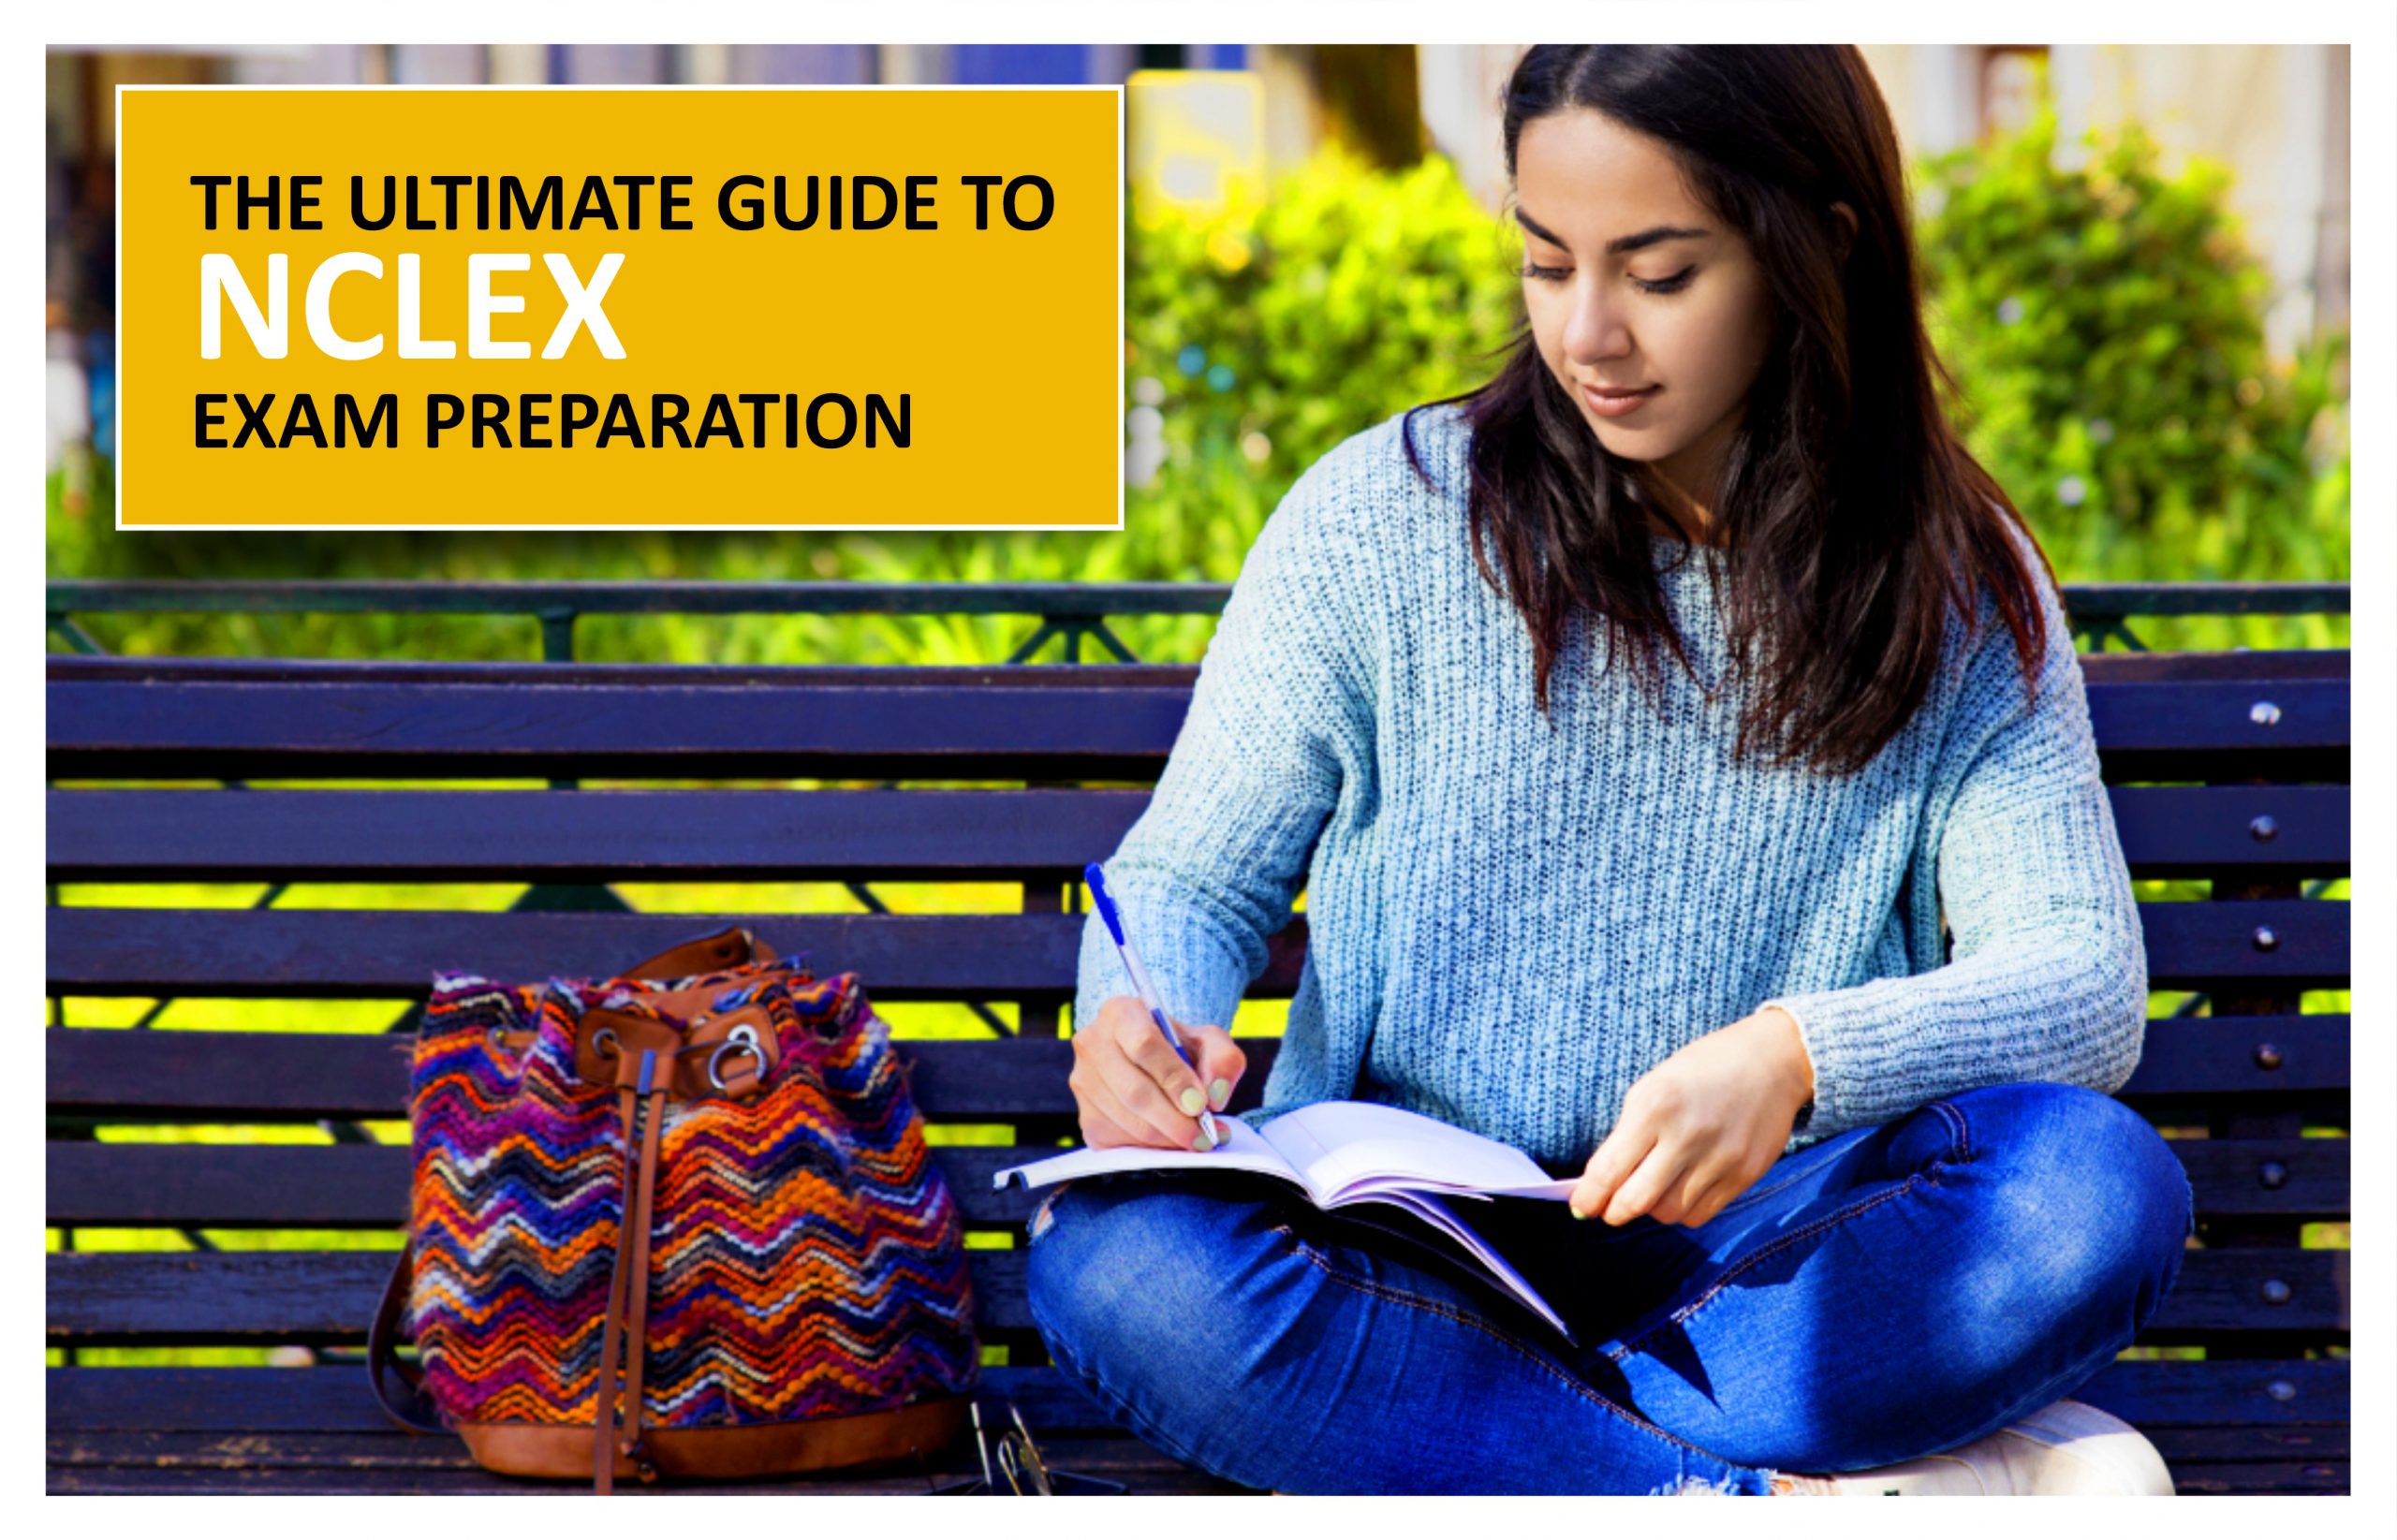 ULTIMATE GUIDE TO NCLEX EXAM PREPARATION